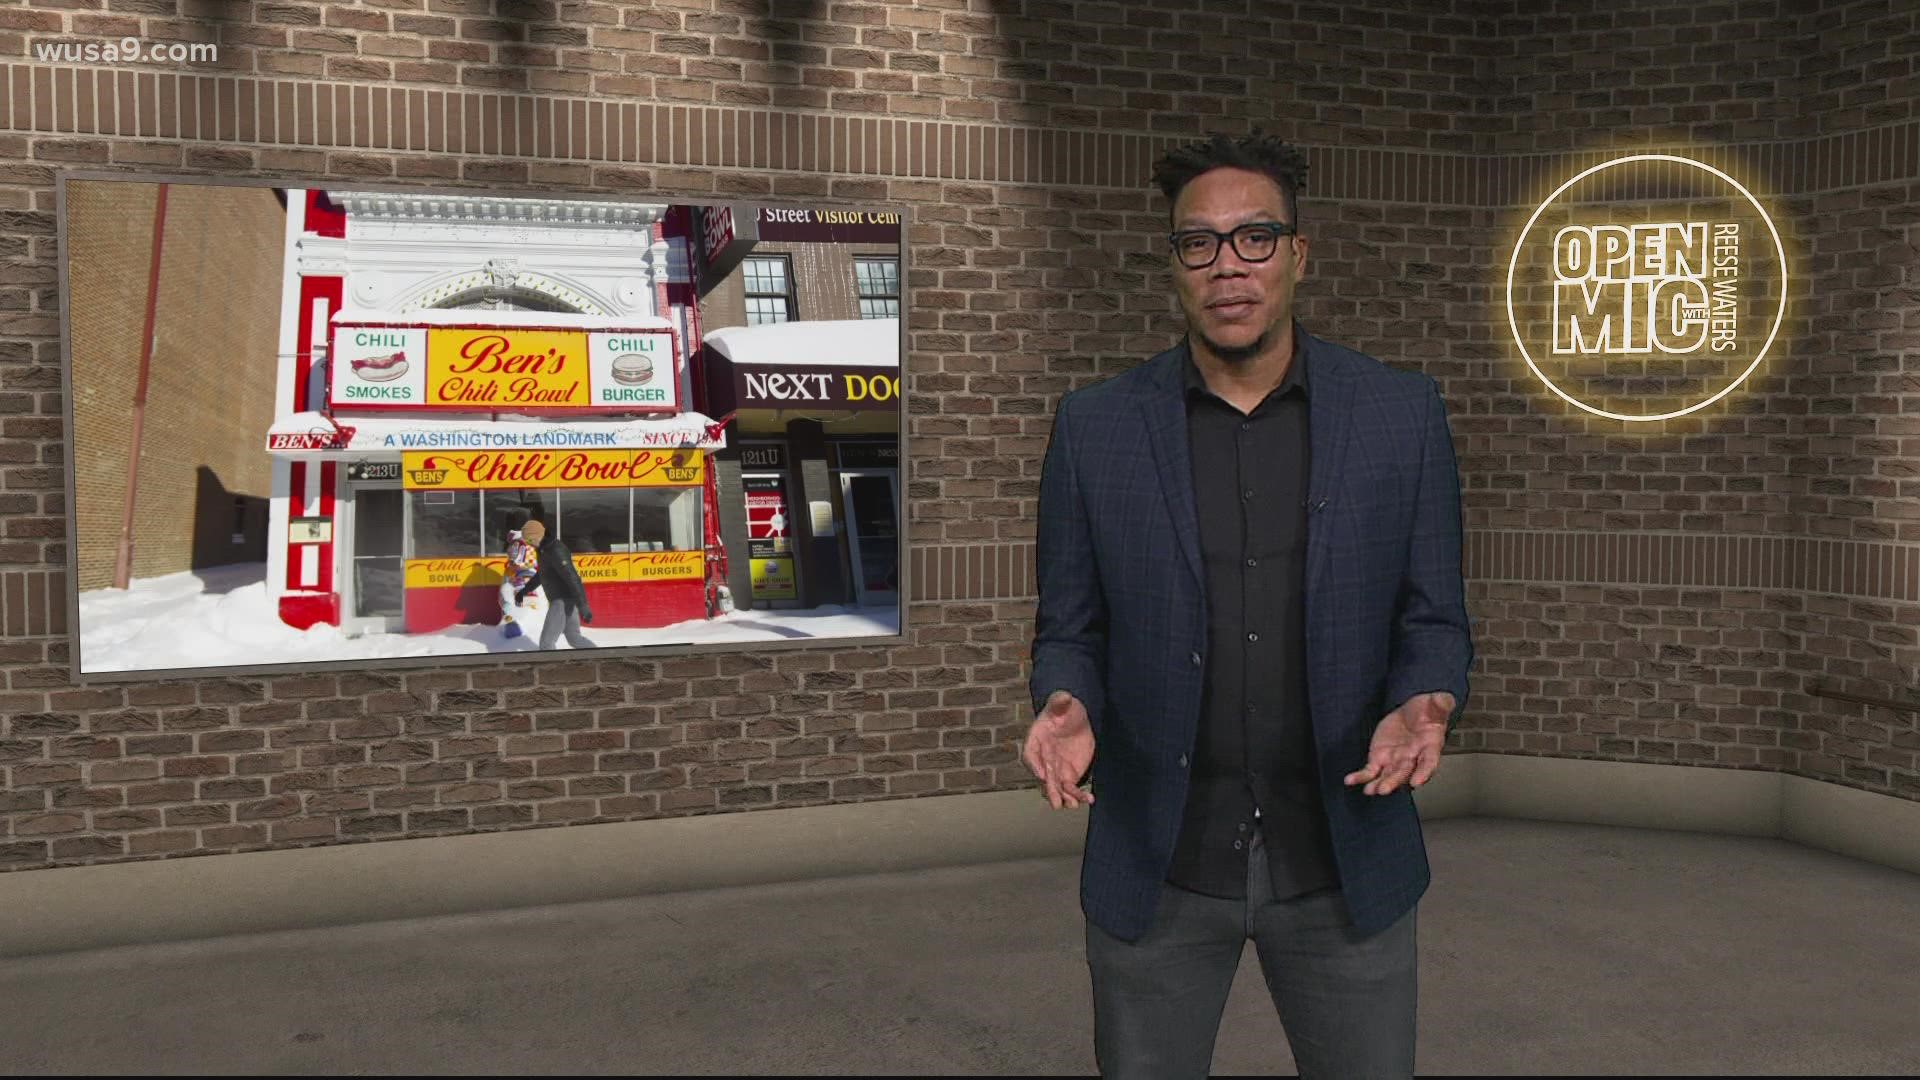 The views expressed in this video are commentary. Reese discusses the "Traveling While Black" exhibit that features a historic DC restaurant. https://bit.ly/3r0Jzal